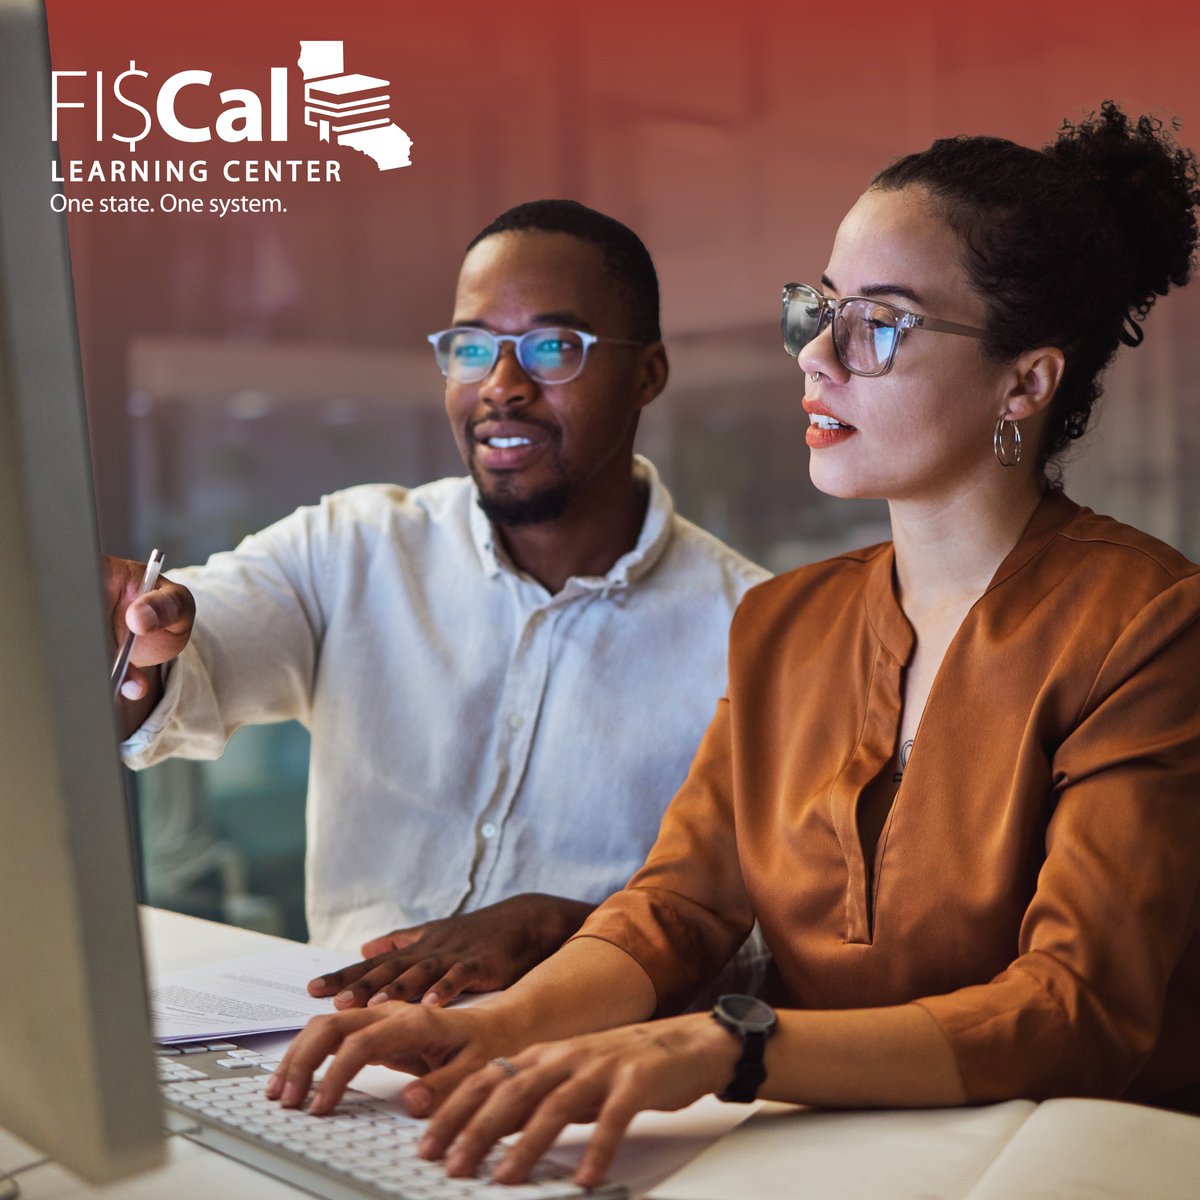 The FI$Cal Learning Center offers training and support for end users on the FI$Cal system, including virtual instructor-led and web-based course information and curricula. Access the FLC: Bit.ly/3daWB0E #Learning #VirtualLearning